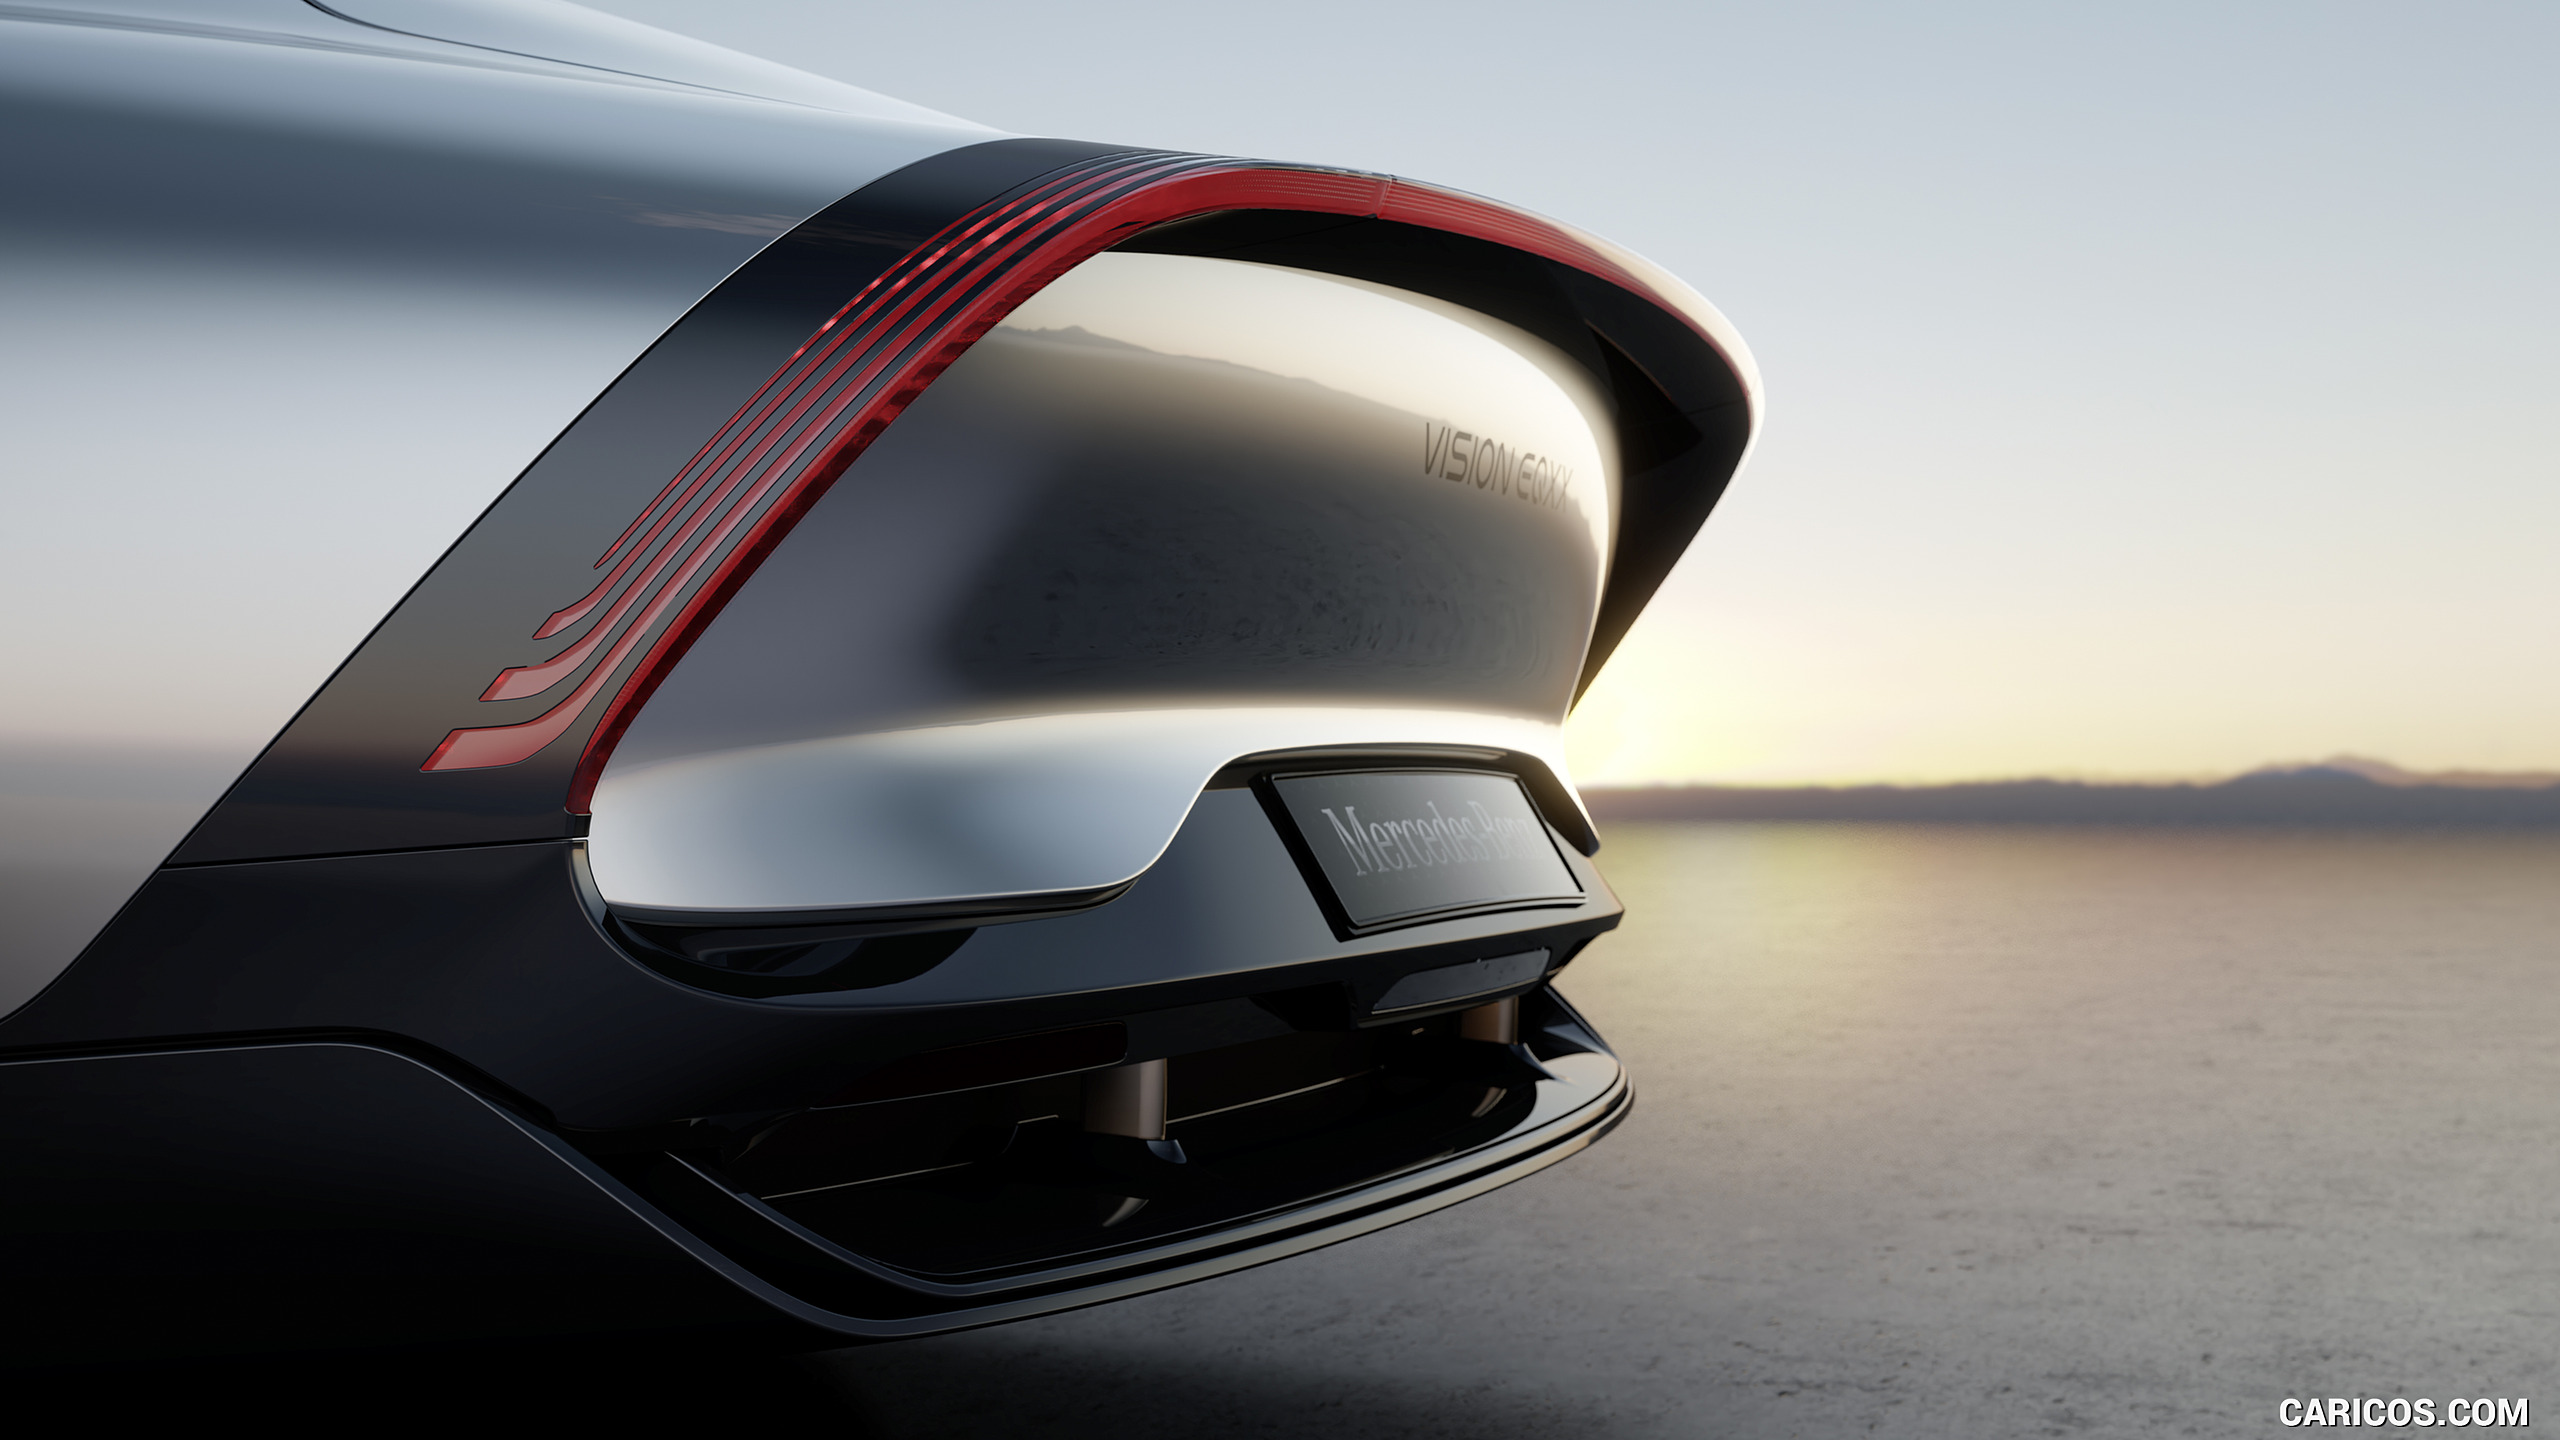 2022 Mercedes-Benz Vision EQXX - Tail Light, #7 of 146